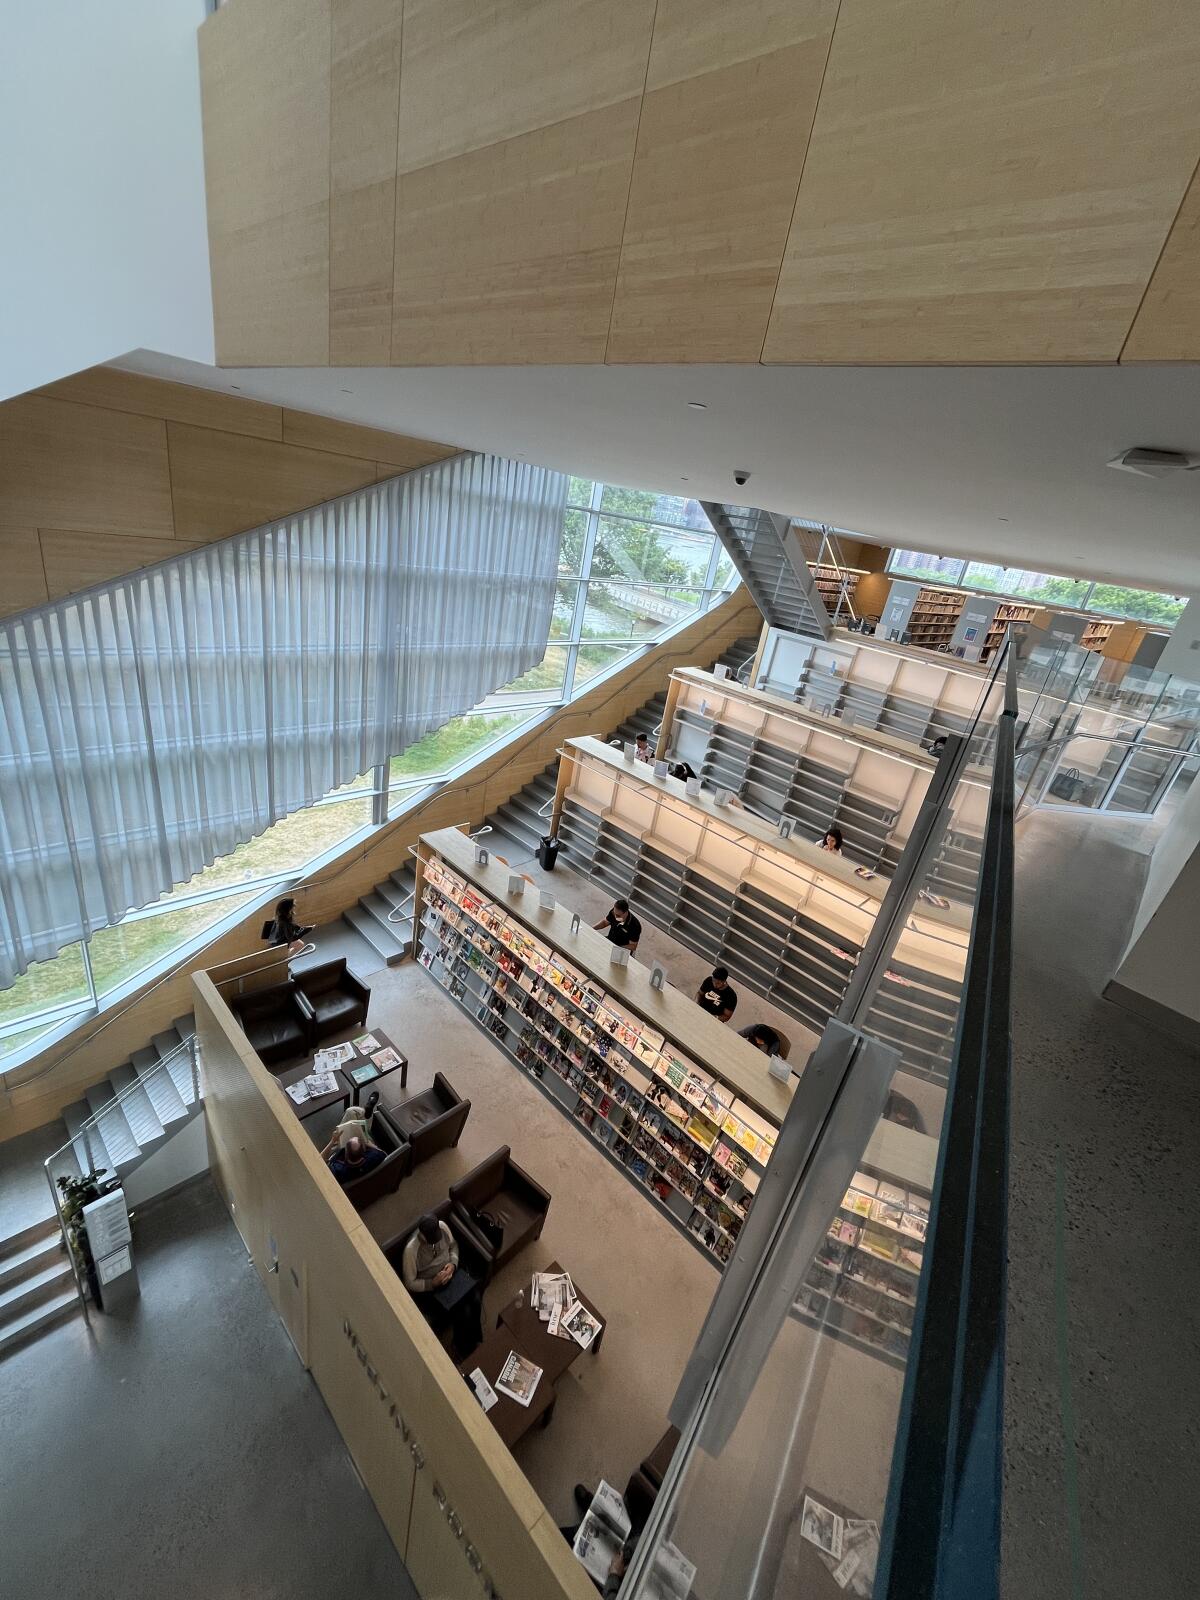 A view from overhead shows a series of stepped mezzanines lined with bookshelfs — some empty.